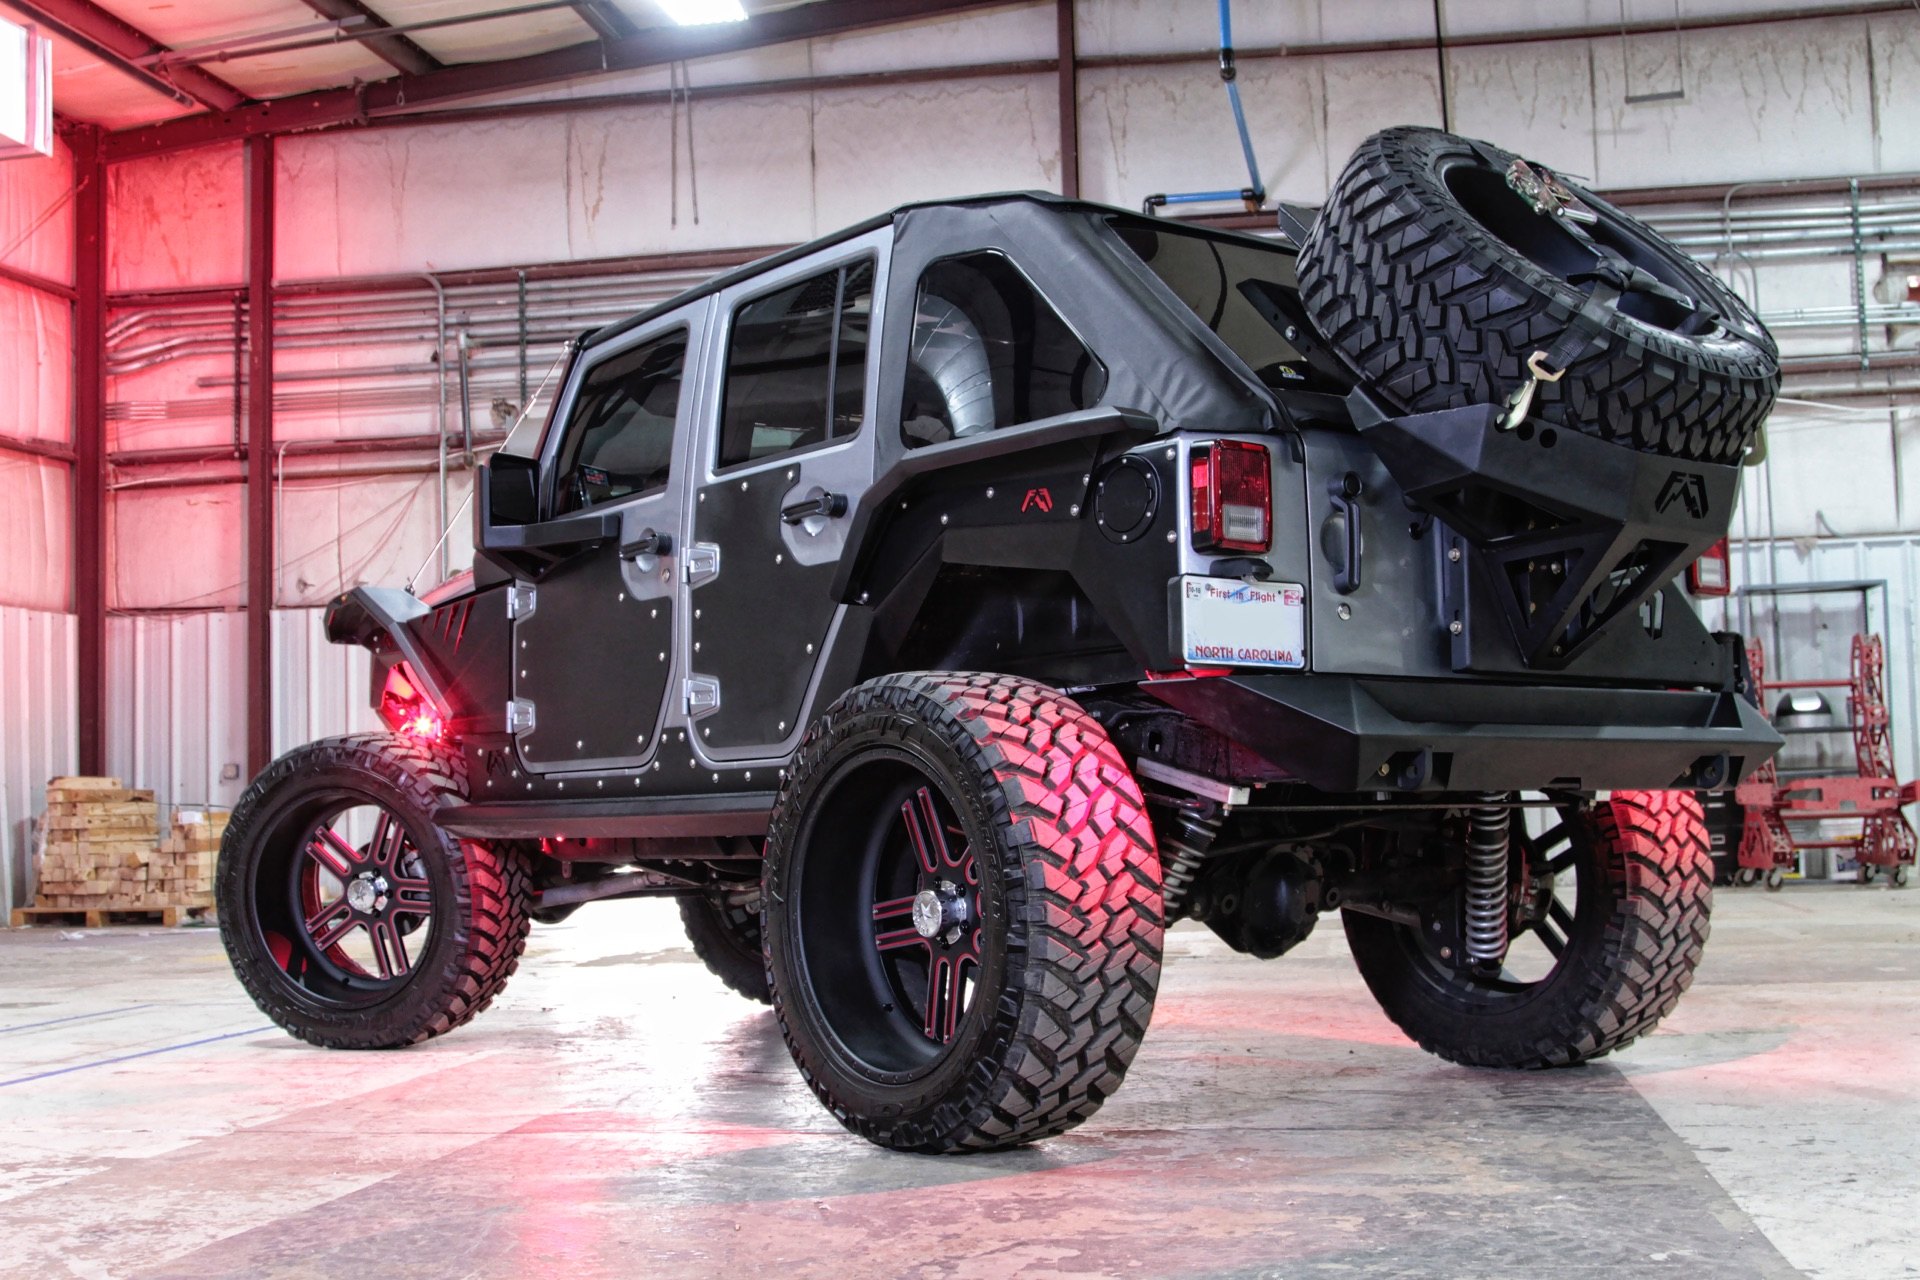 JK wrangler with Fab Fours spare tire carrier and off-road fender flares - Photo by Jason Bukolt (LFTD & LVLD Magazine)